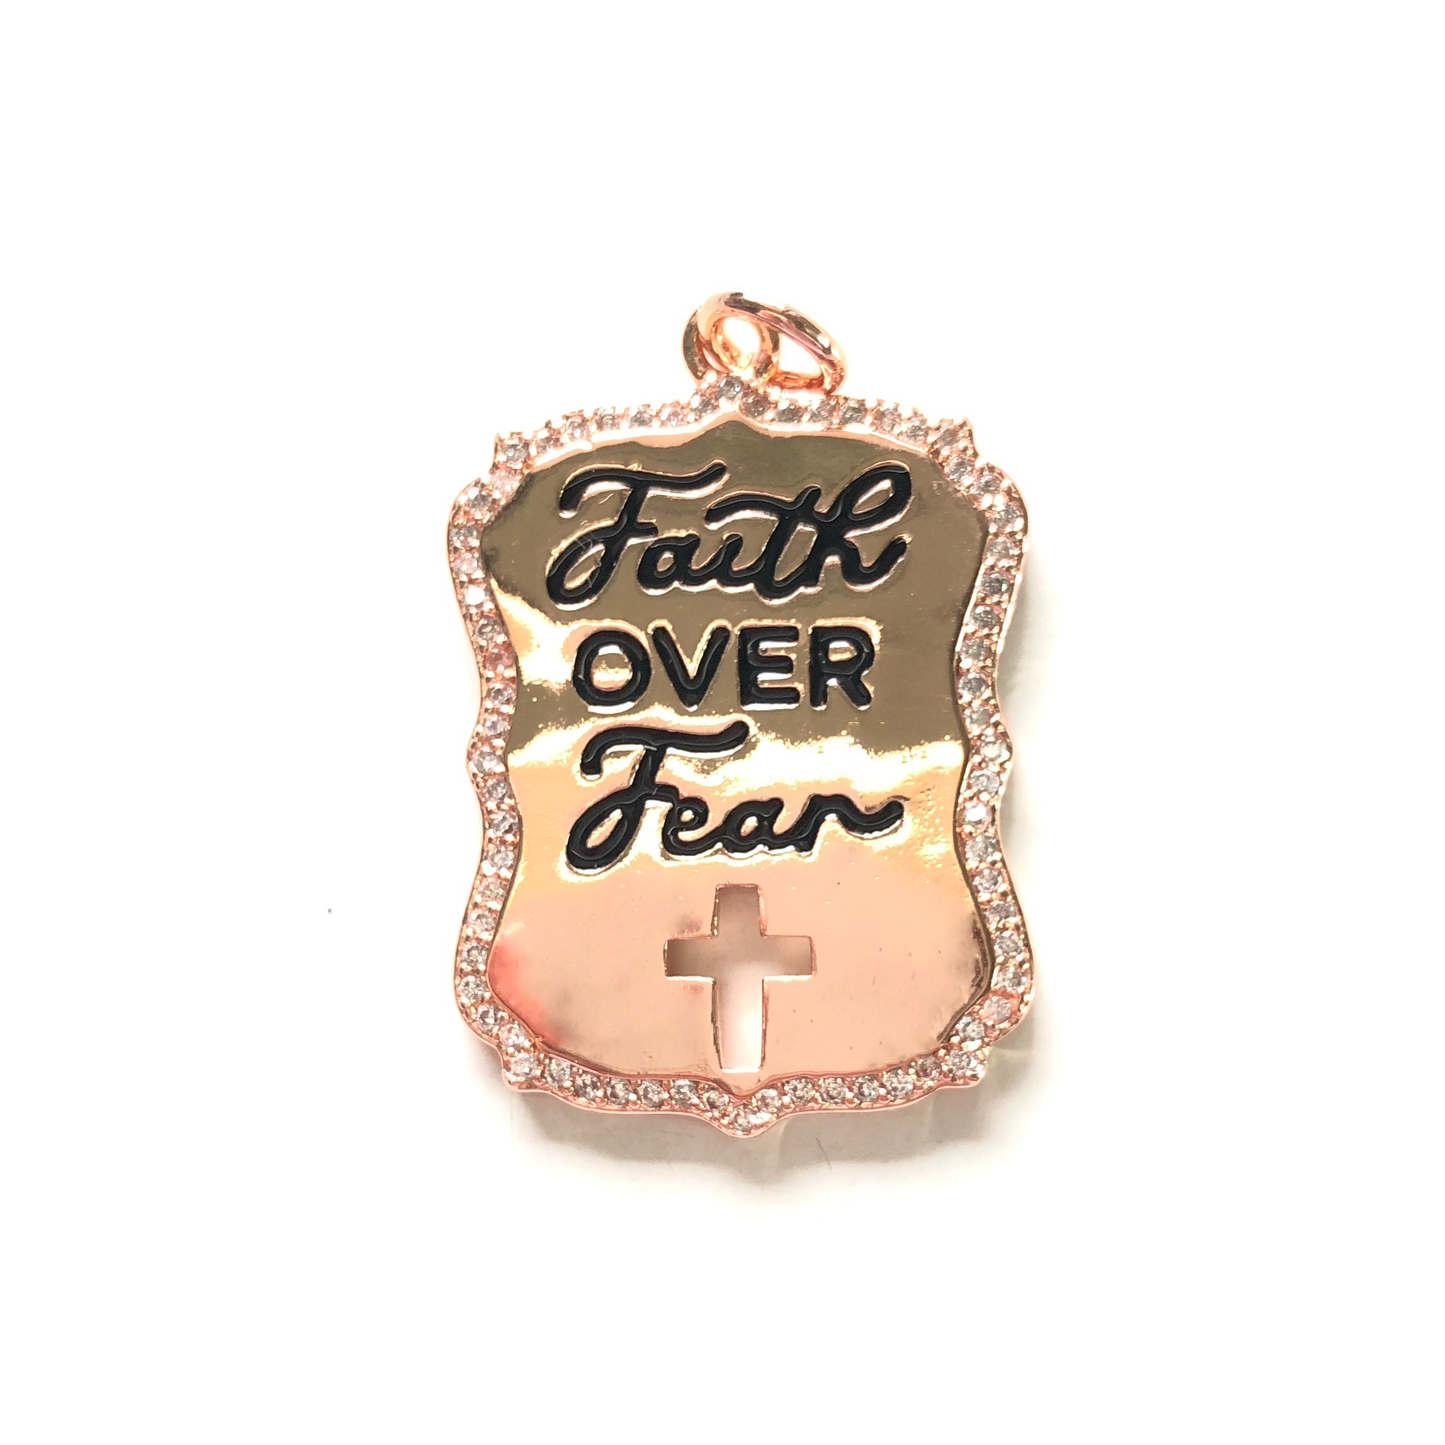 10pcs/lot CZ Paved Faith Over Fear Word Tags Charms Rose Gold CZ Paved Charms Christian Quotes New Charms Arrivals Charms Beads Beyond